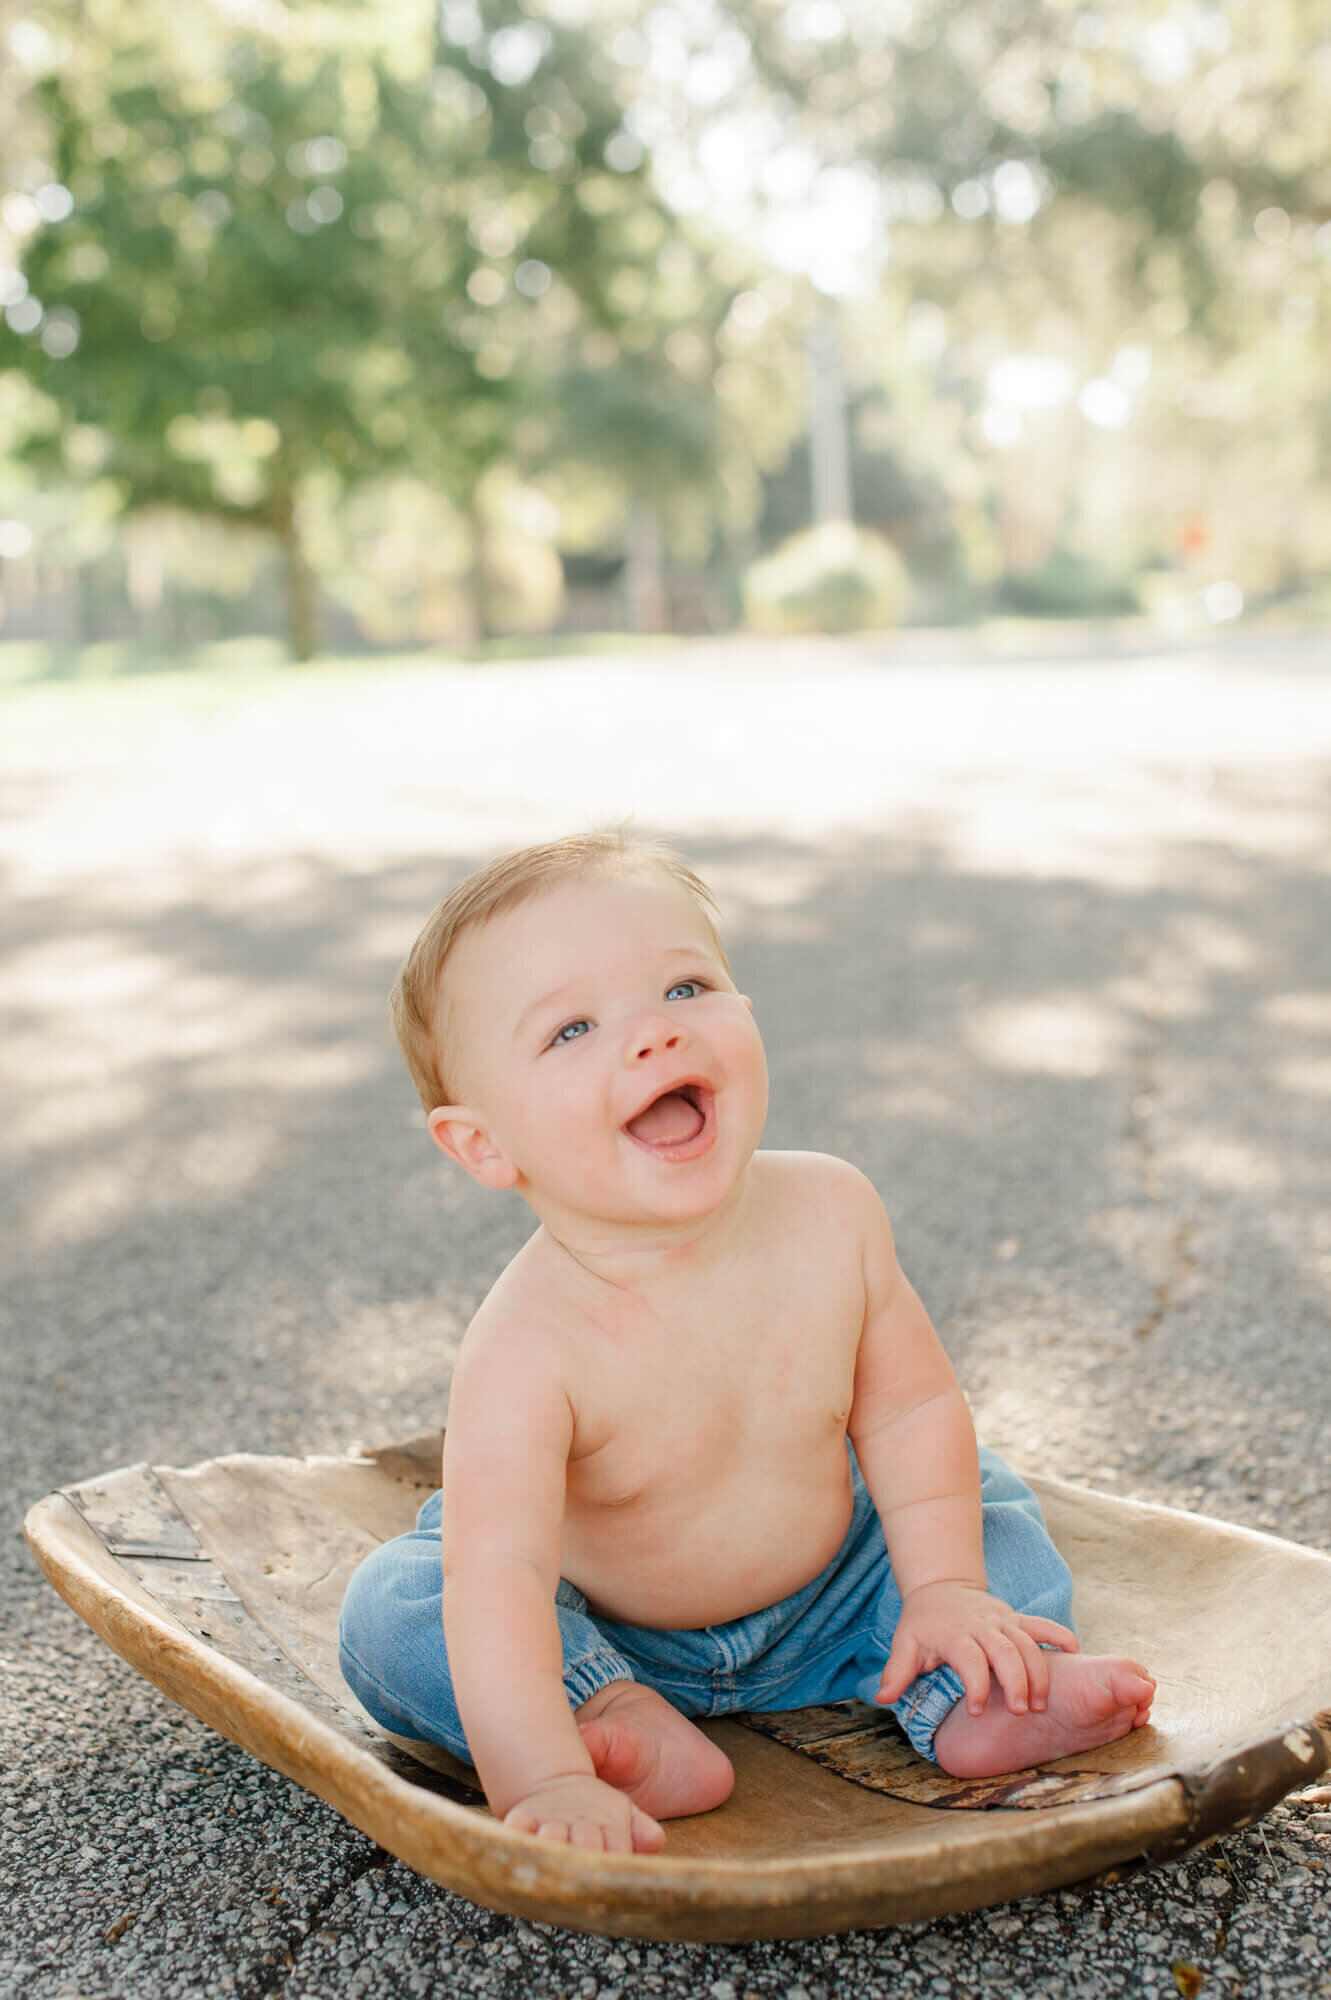 Melbourne Fl family photographer captures son smiling while sitting on a wooden seat in the middle of the road